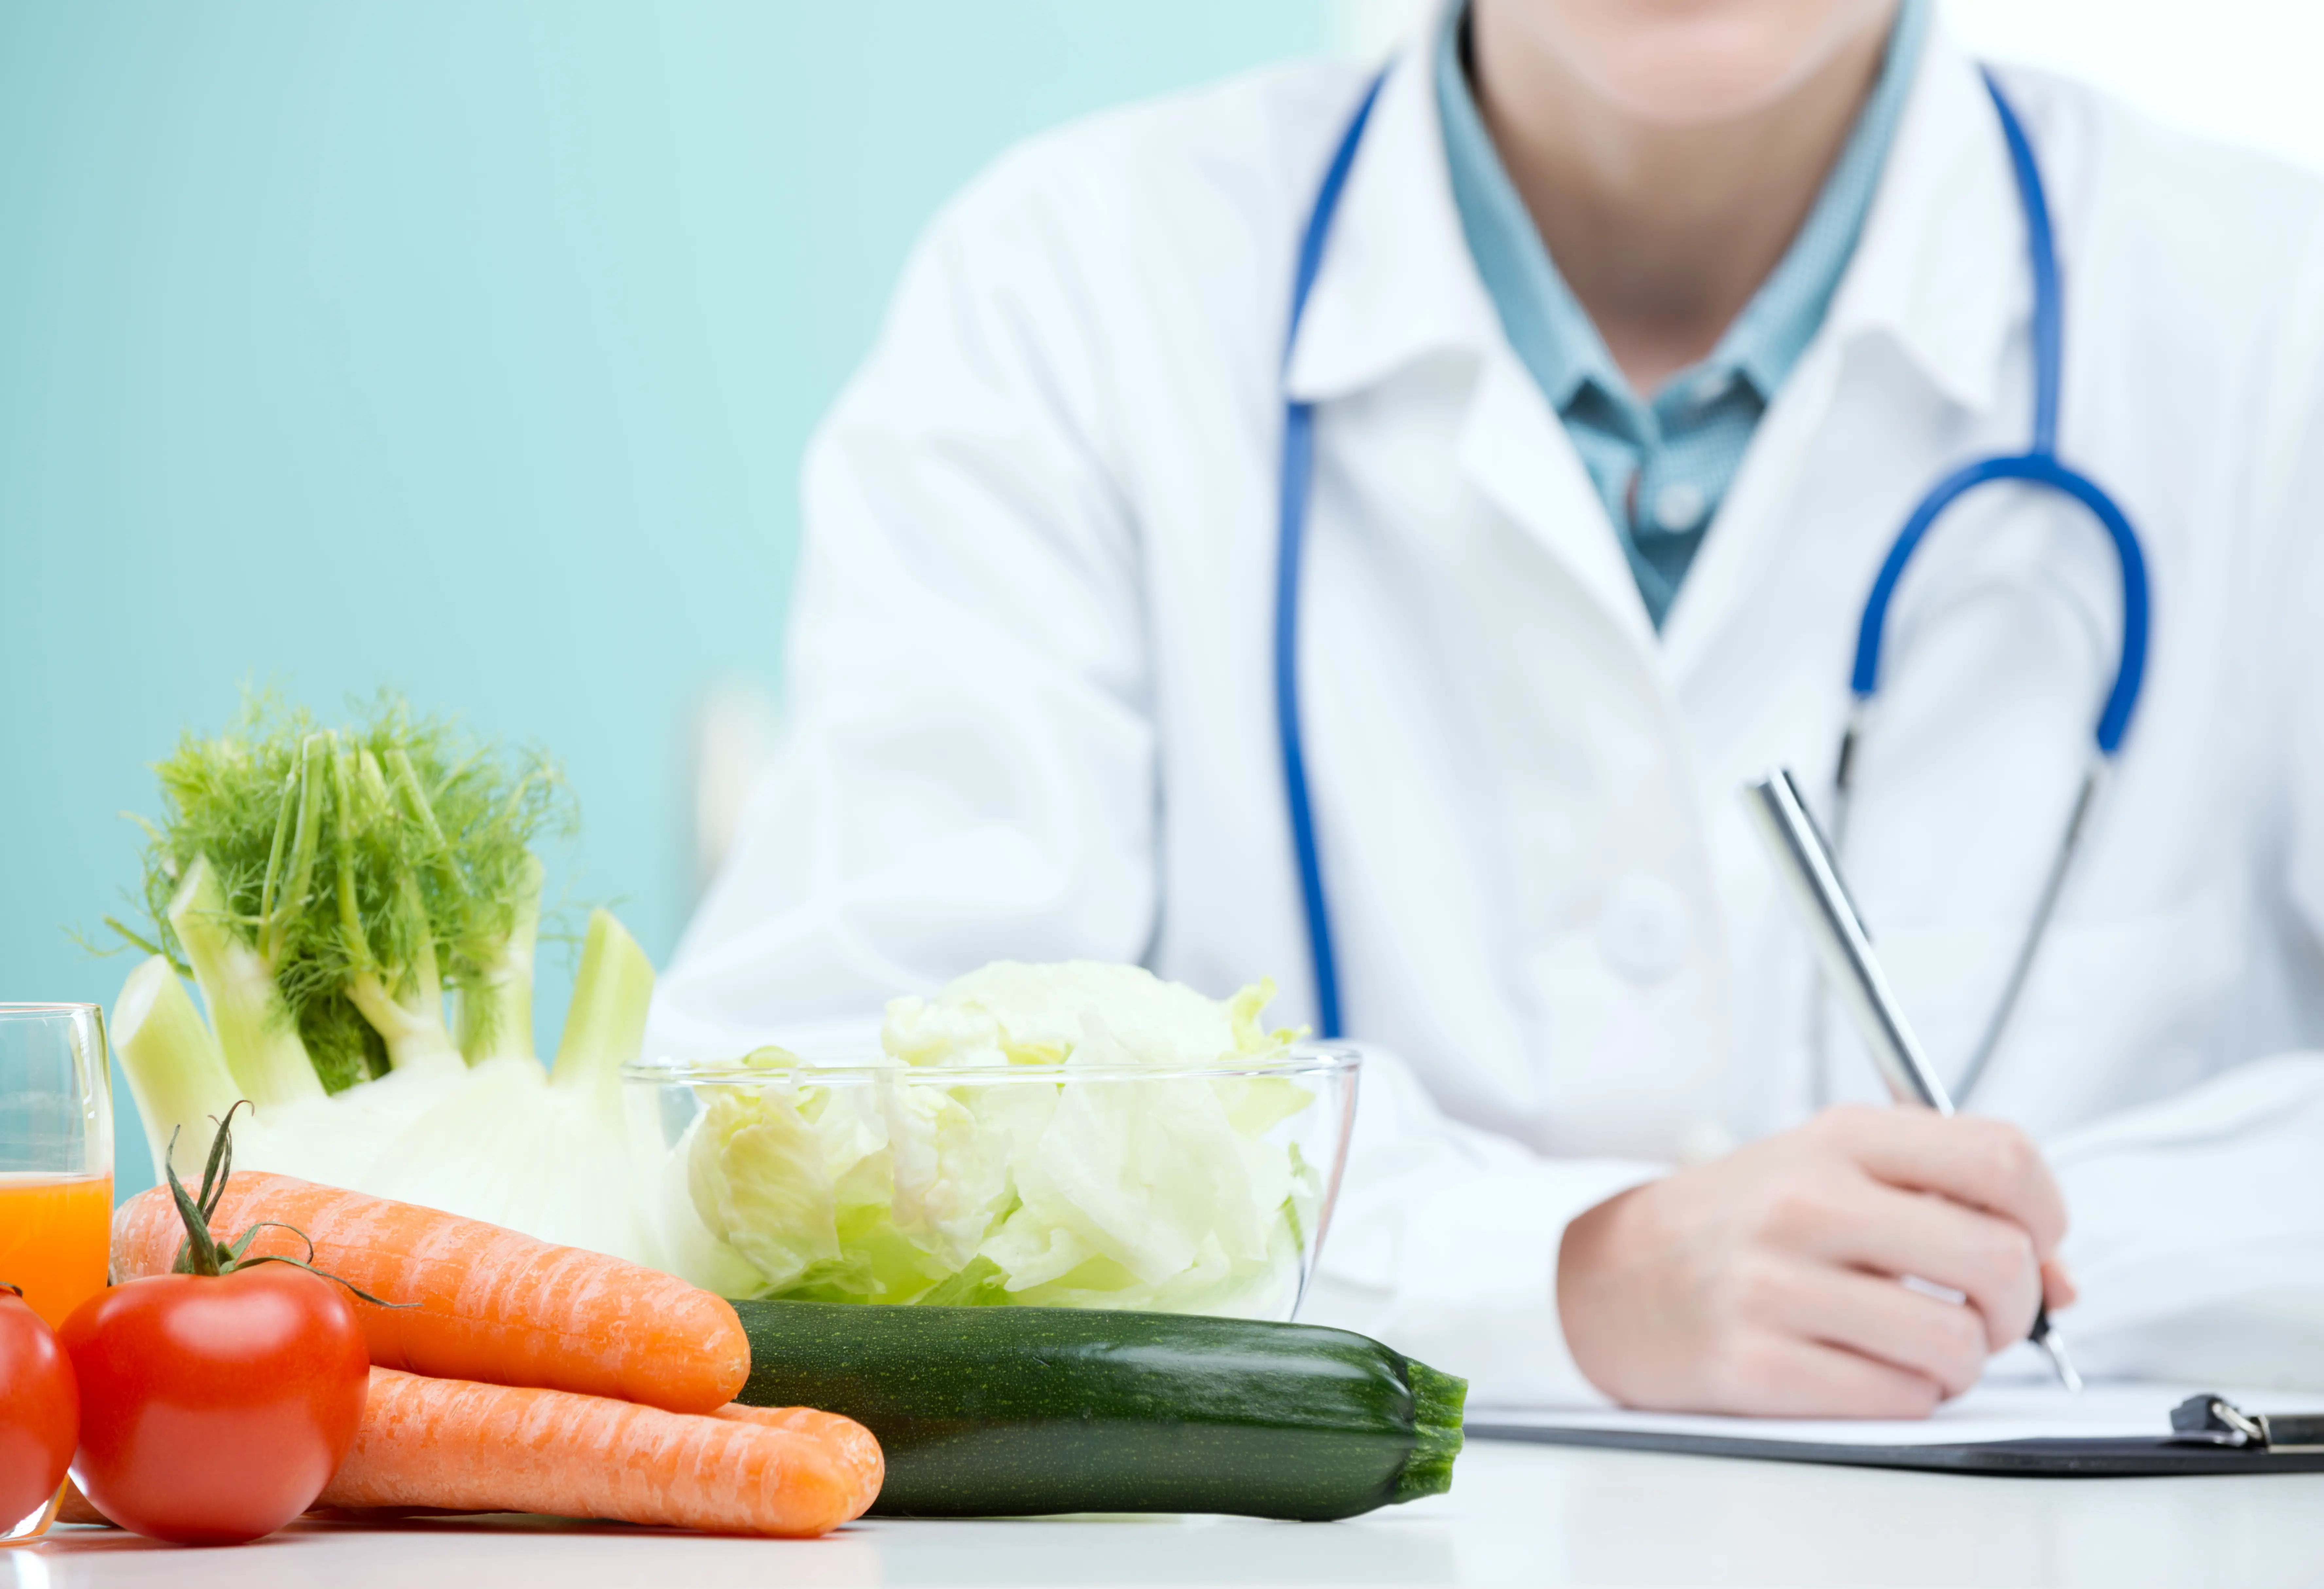 Prescribing Fruits And Veggies Could Save billions Of Dollars In Healthcare Costs 25122001_l